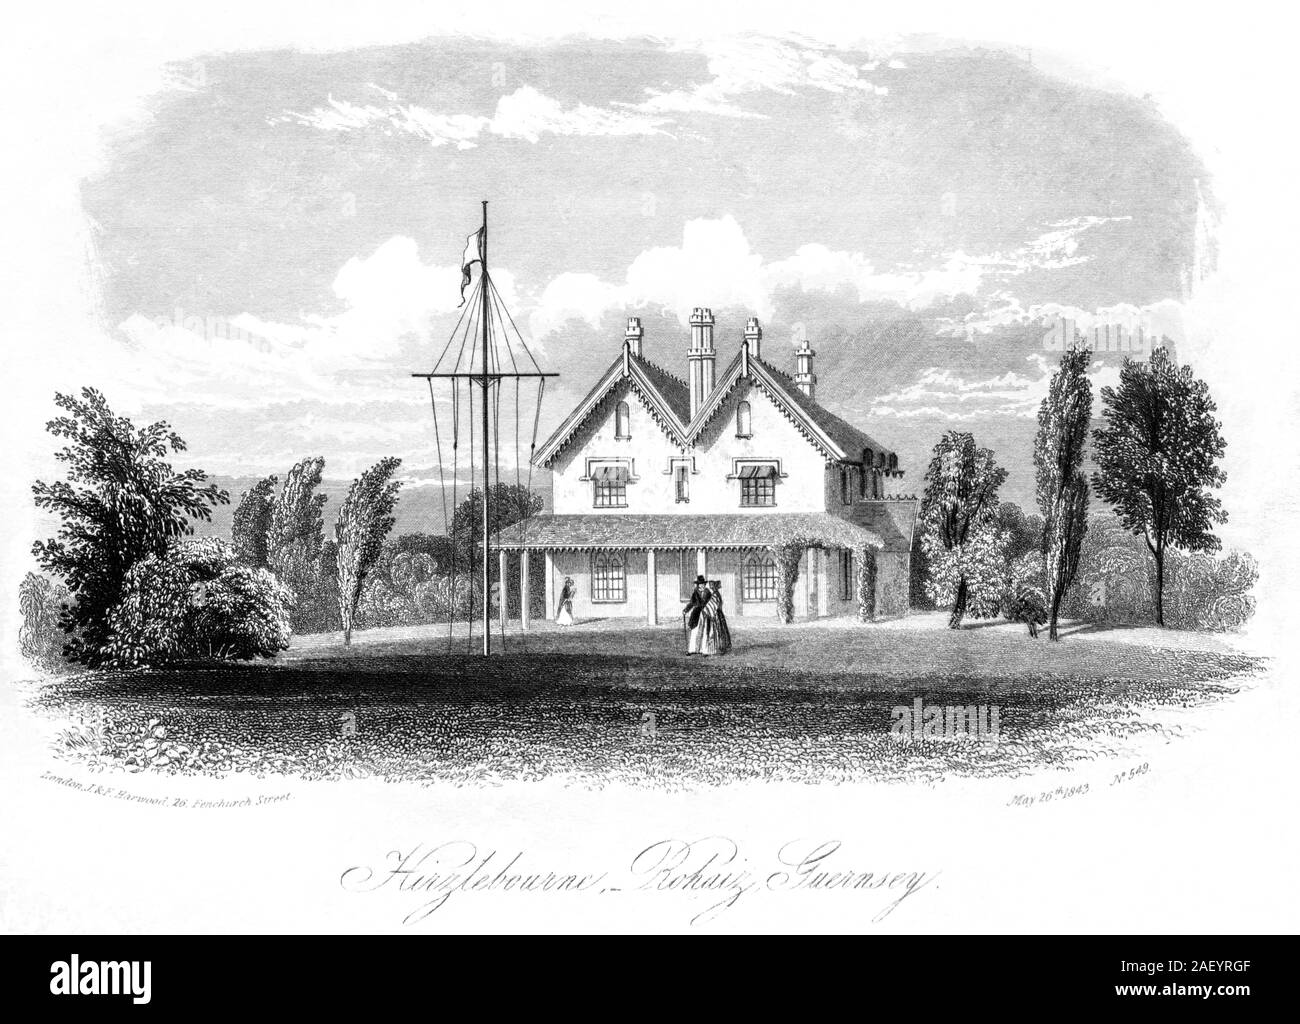 An engraving of Hirzlebourne, Rohaiz (Rohais) Guernsey dated May 26th 1843 scanned at high resolution. Believed copyright free. Stock Photo